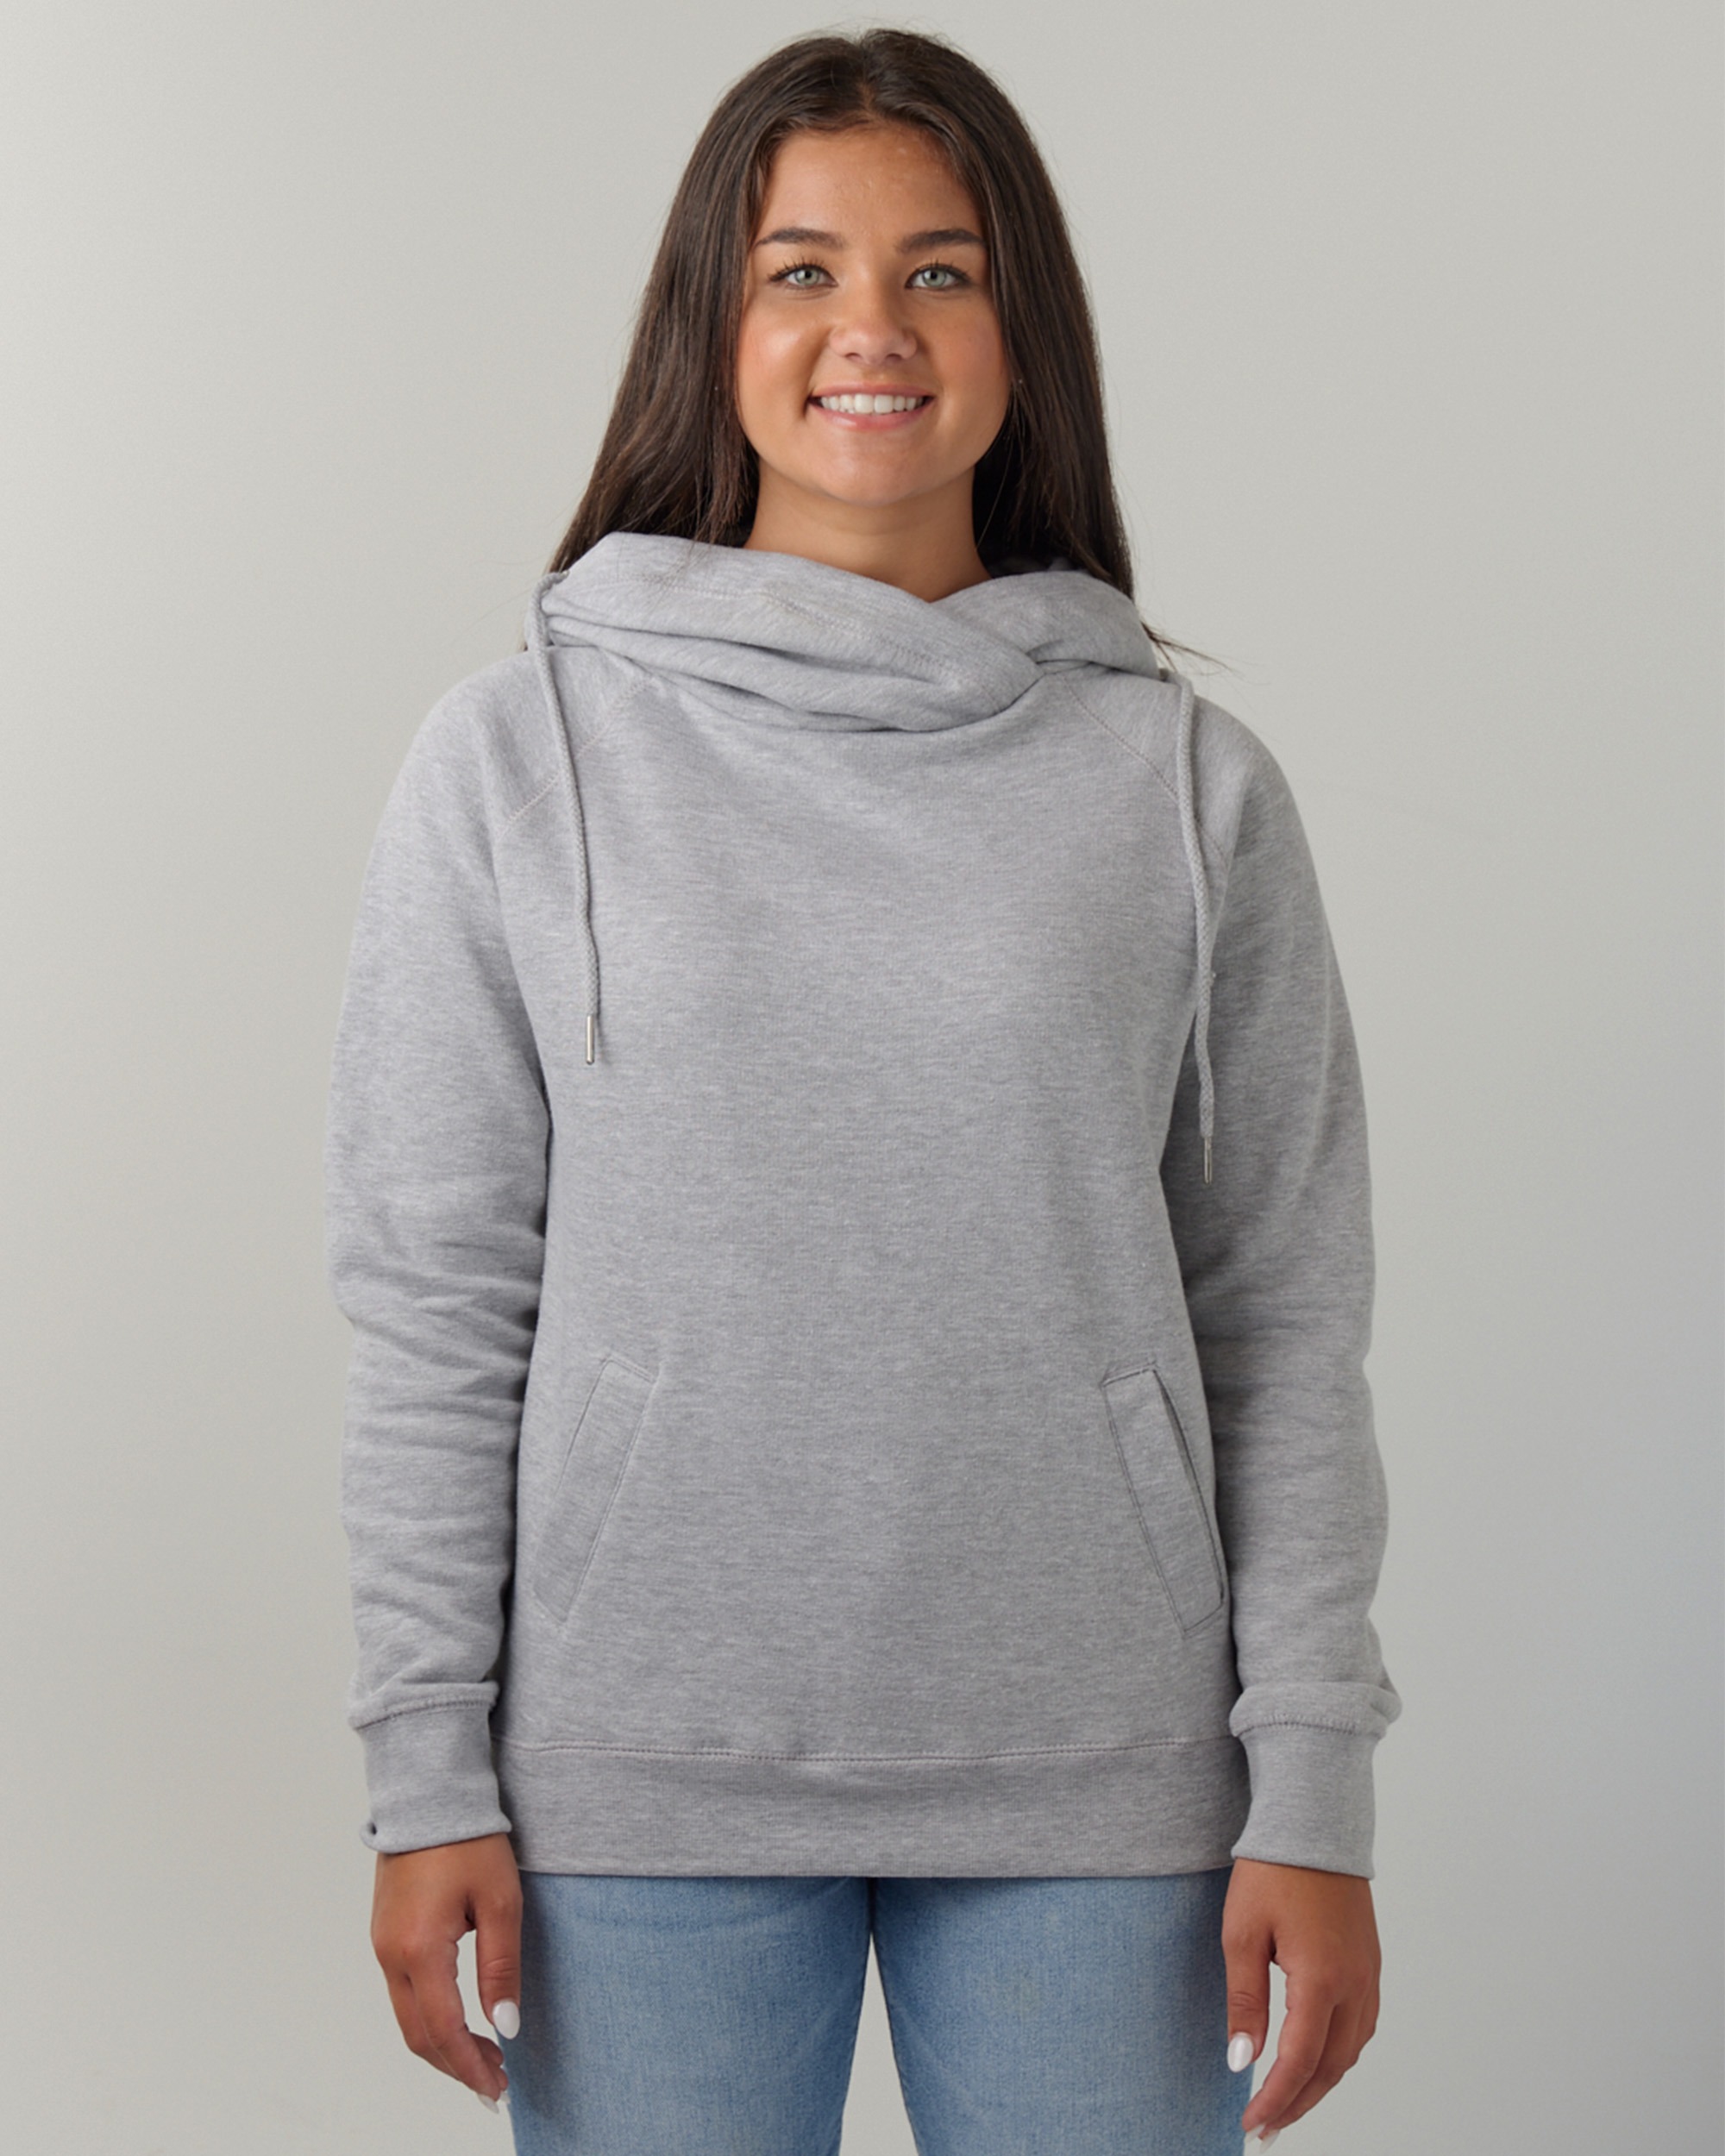 Enza® 32979 Ladies Classic Fleece Funnel Neck Pullover Hood, shown in Athletic Heather